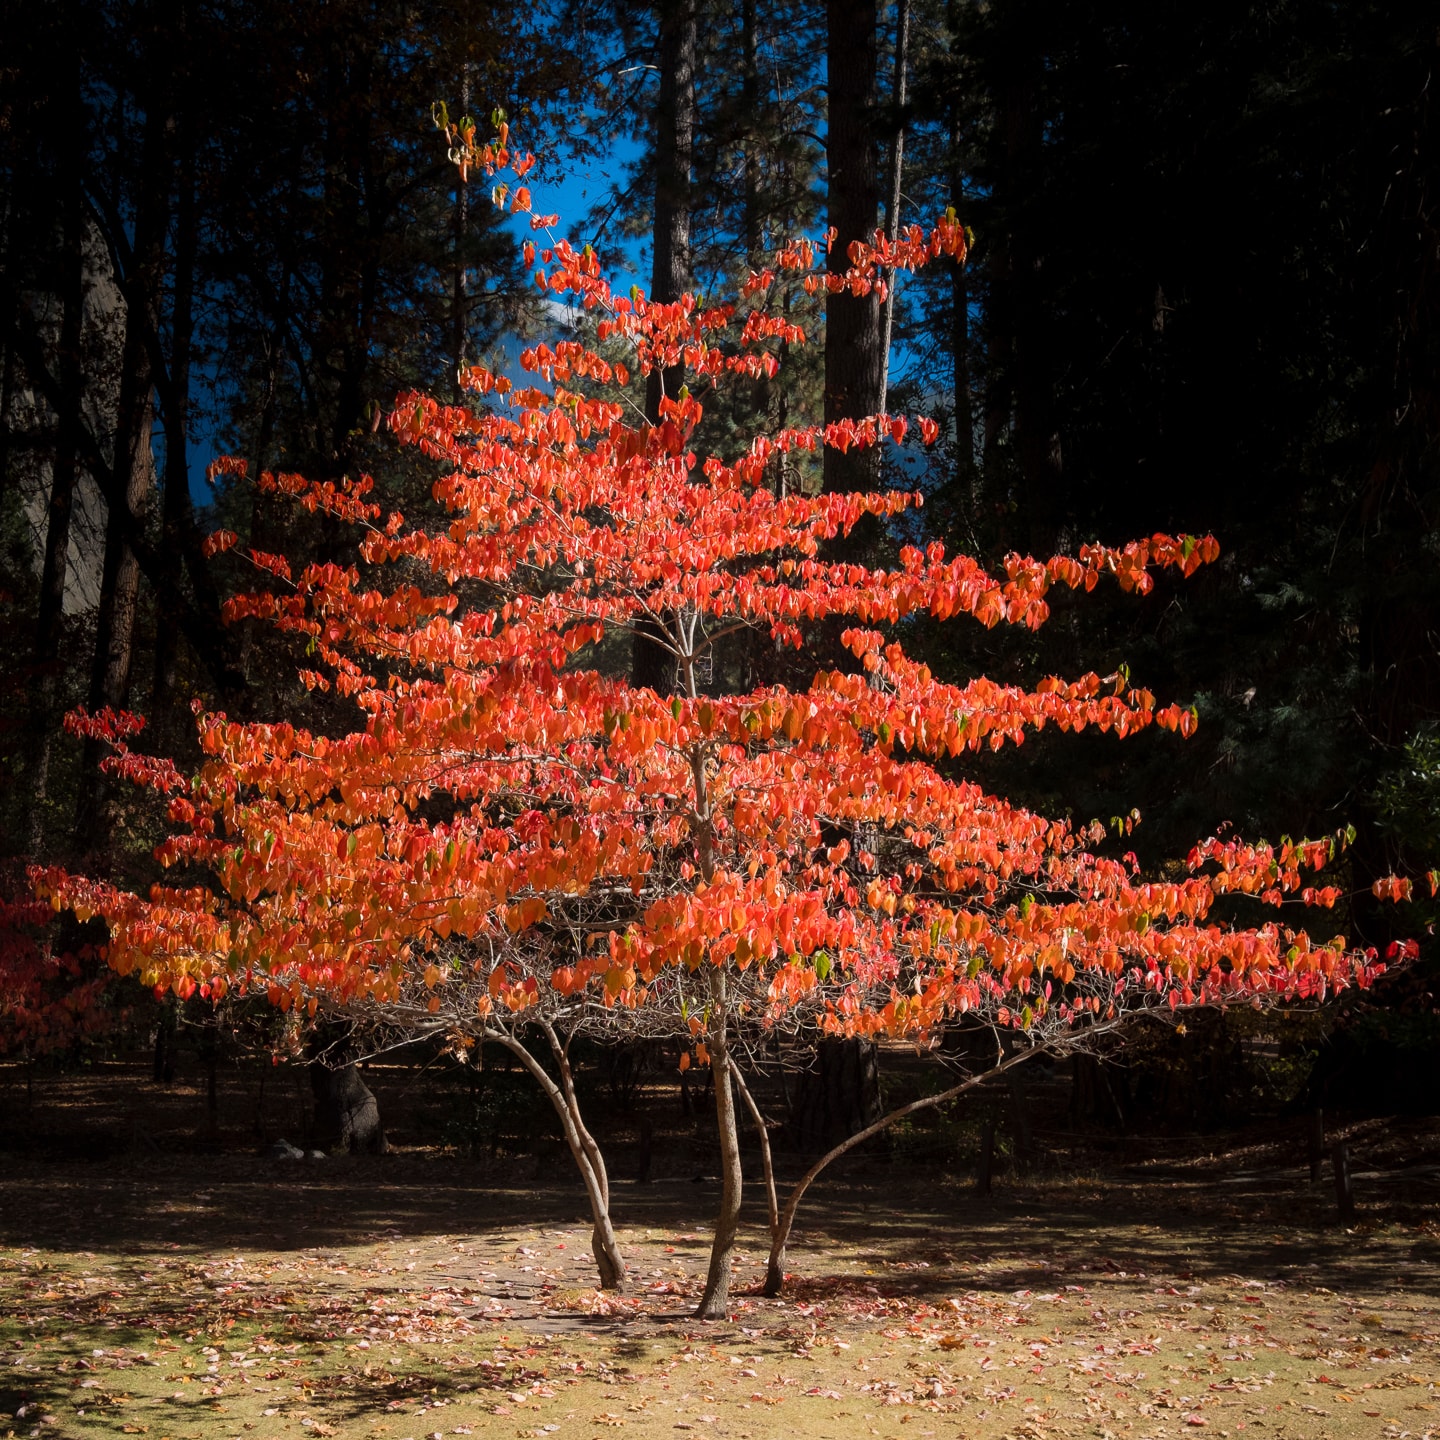 A dogwood tree with red leaves during fall.